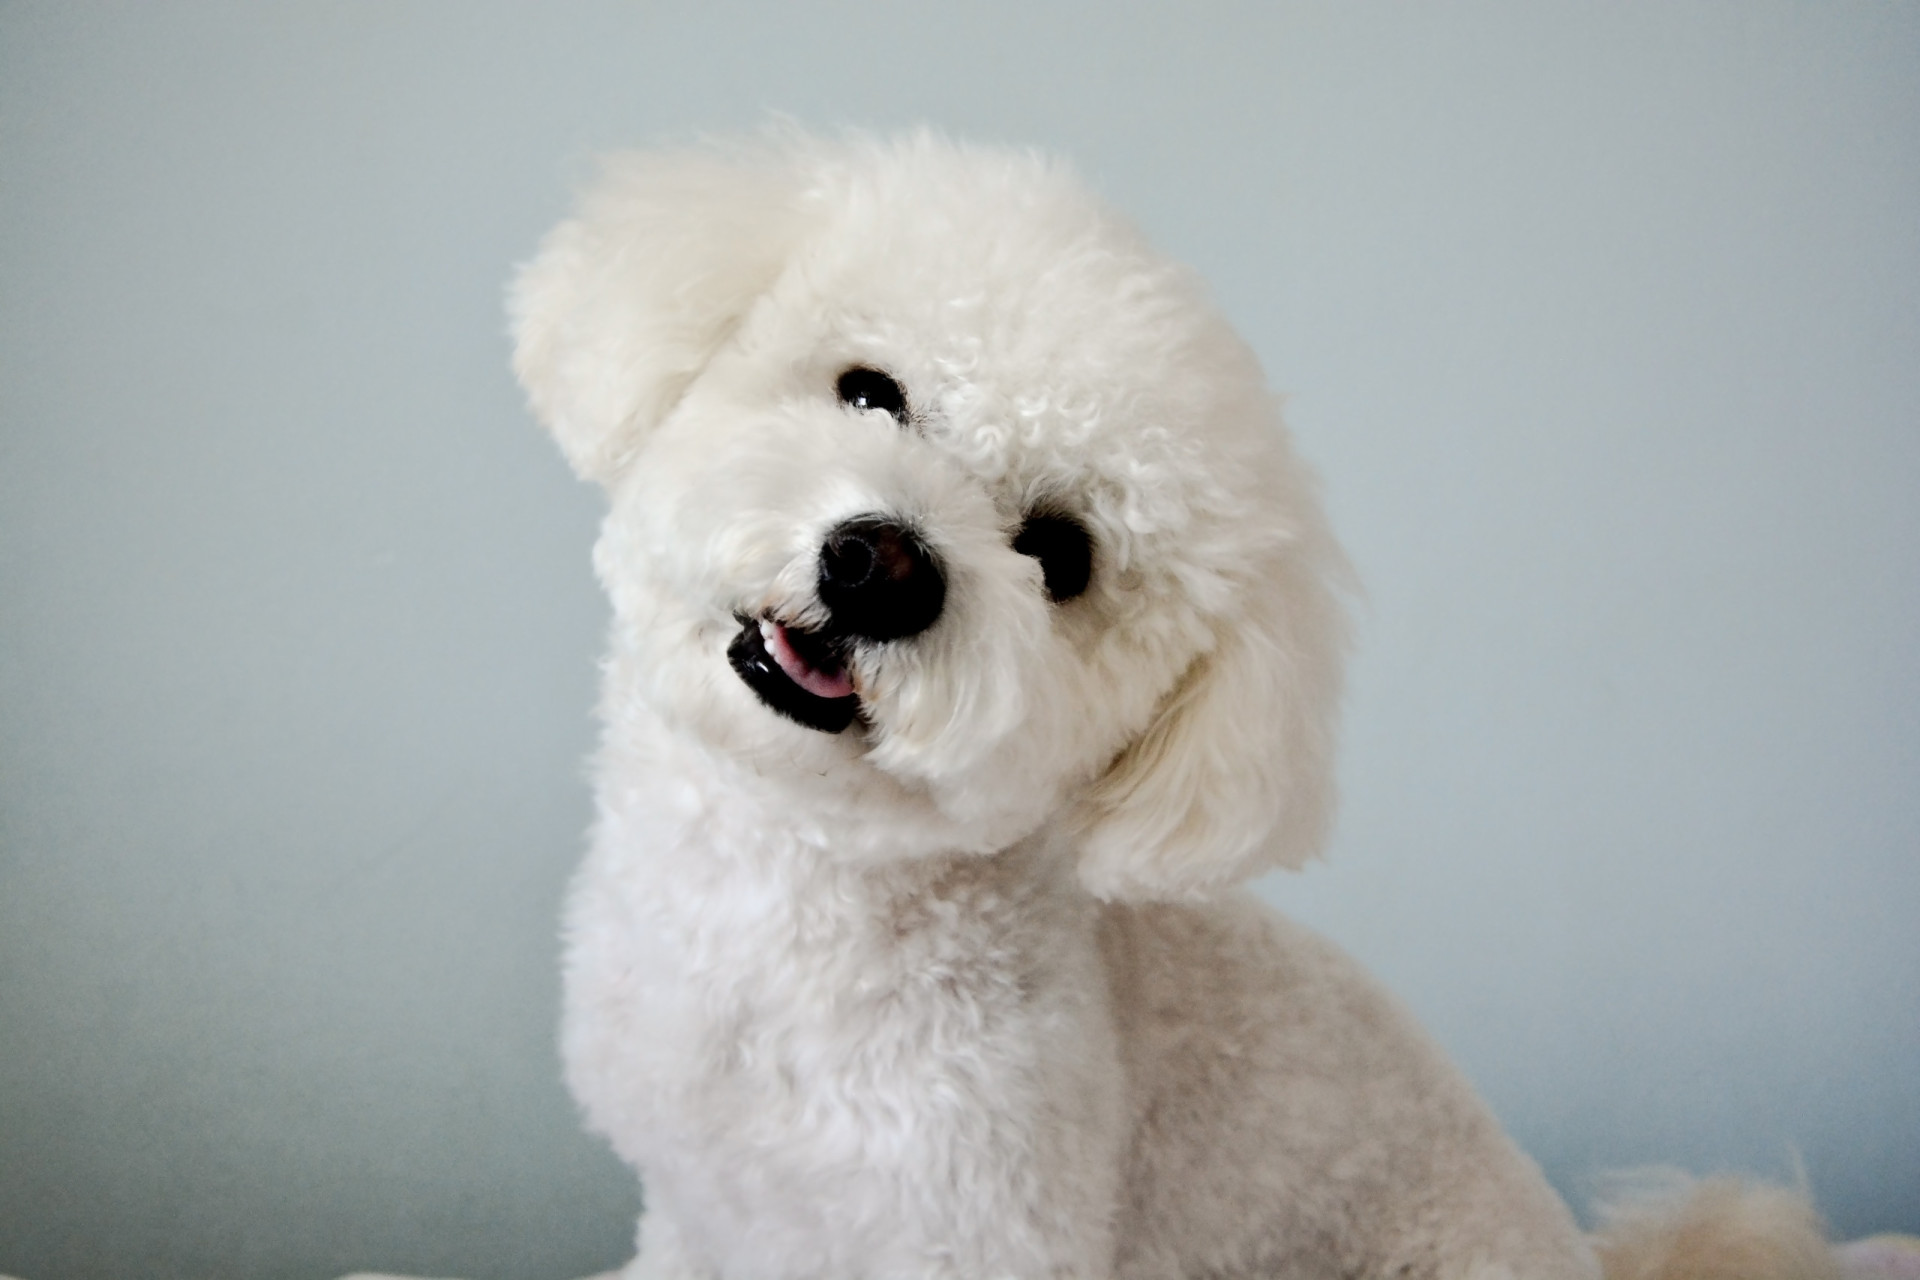 <p>While this breed looks like a stuffed toy suitable for infants, they're actually better suited to older people. Their life expectancy is 13 to 15 years. </p><p>You may also like:<a href="https://www.starsinsider.com/n/463329?utm_source=msn.com&utm_medium=display&utm_campaign=referral_description&utm_content=605595en-us"> Stars who fell in love with their on-screen pets</a></p>